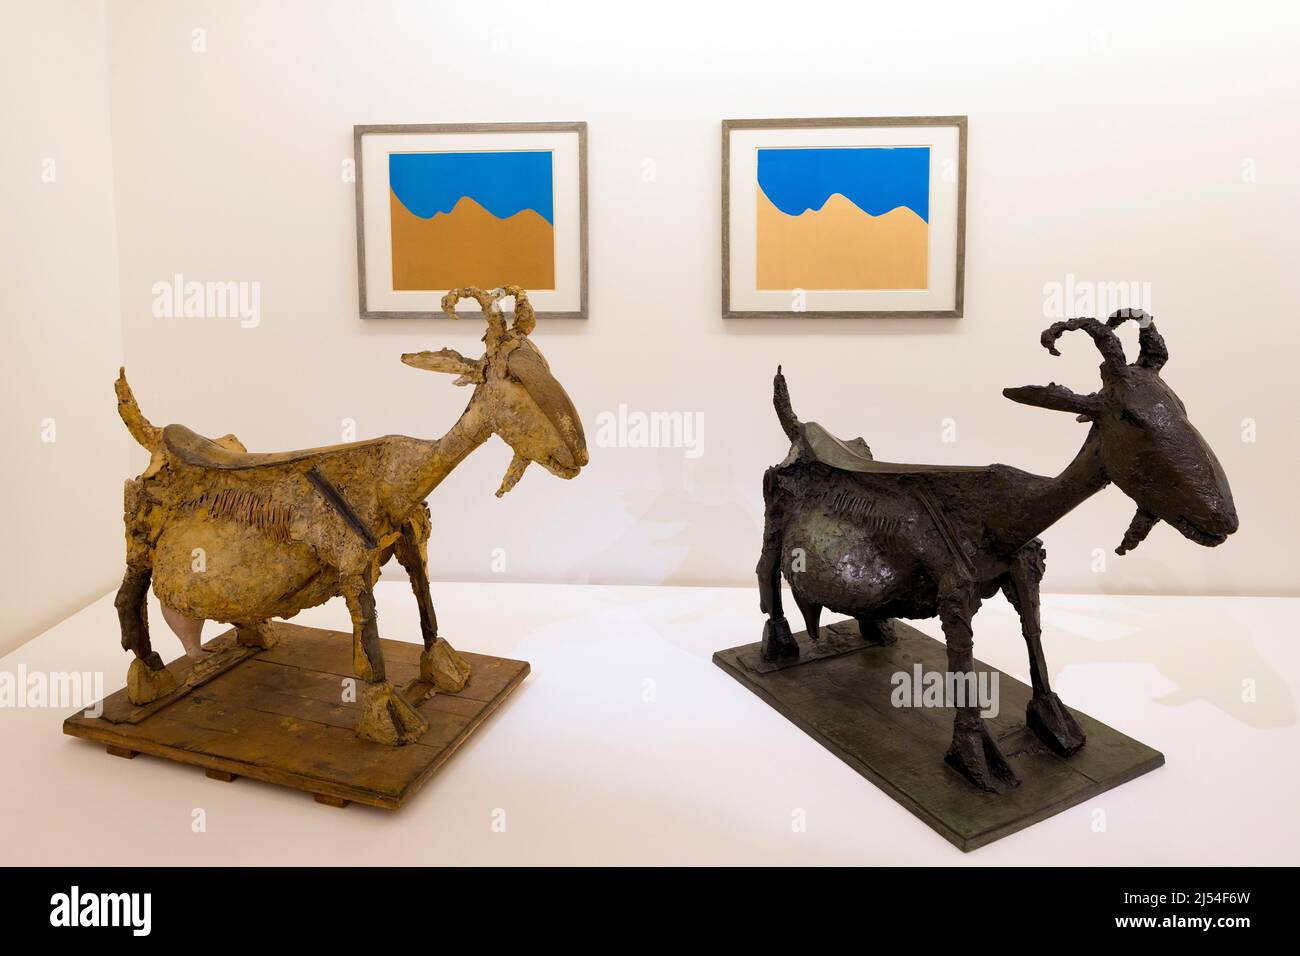 The Goat, La Chevre, 1950, statues interior of Musee Picasso, Paris, France, Europe Stock Photo